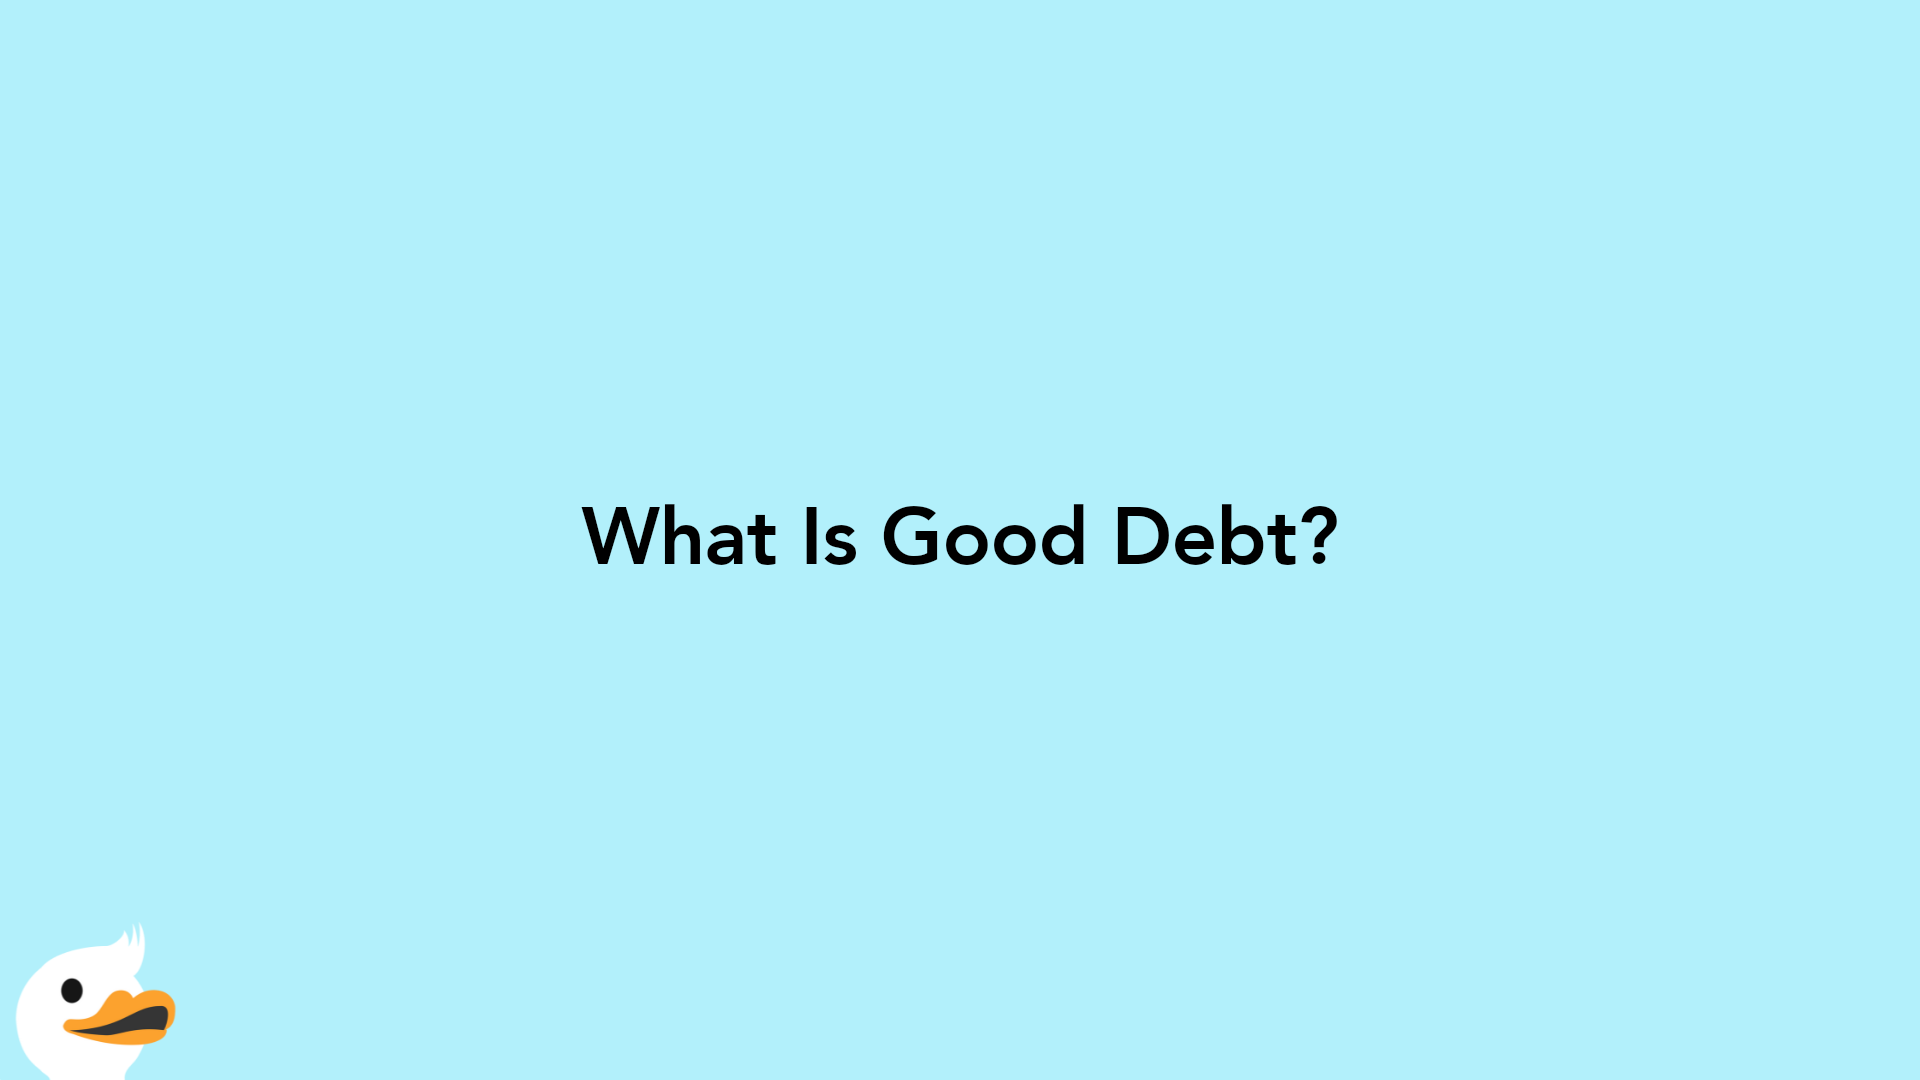 What Is Good Debt?